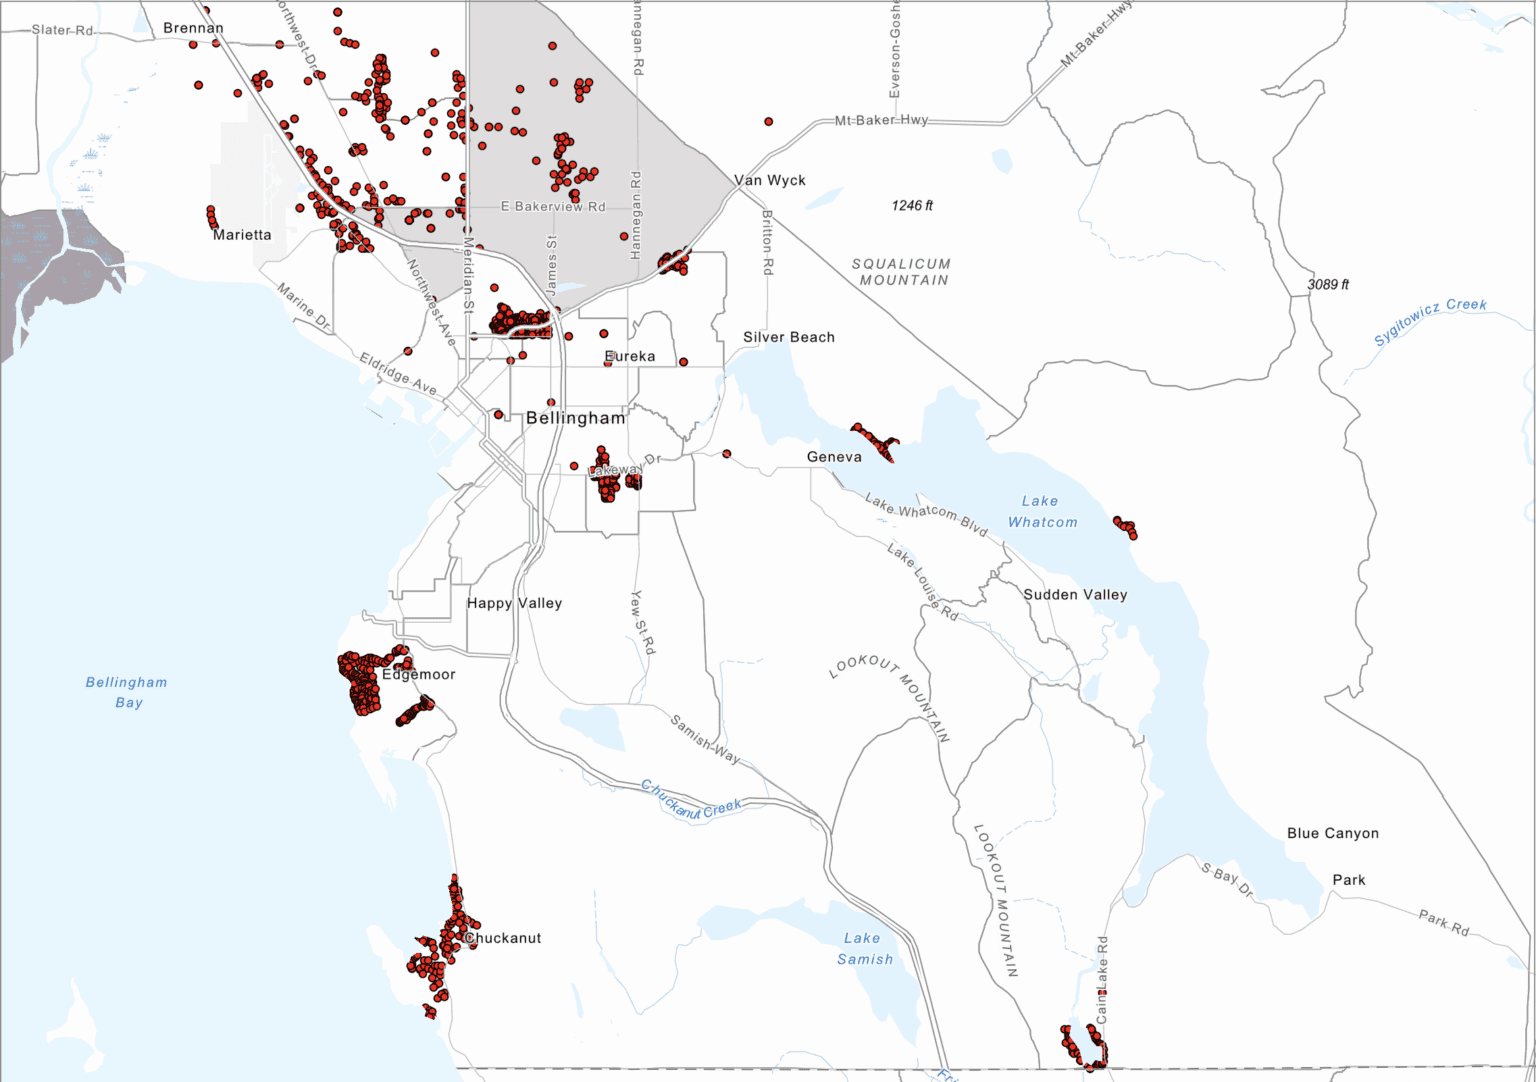 This section of a preliminary map shows the properties in Bellingham that were restricted by racial covenants.